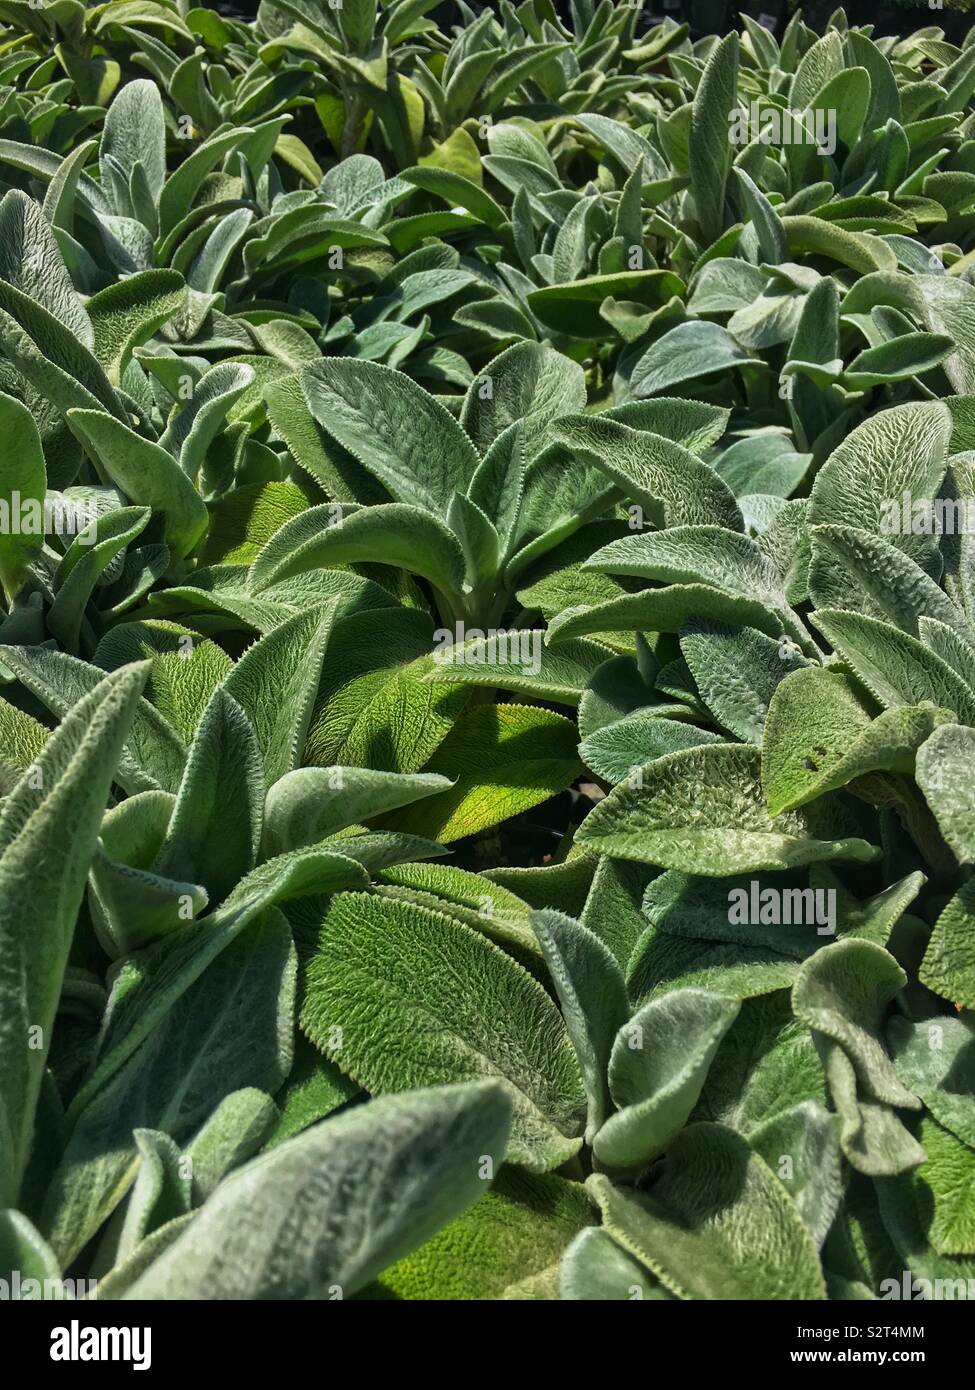 Field full of beautiful green mature Stachys byzantina, lamb’s ear plants growing in the sunshine. Stock Photo